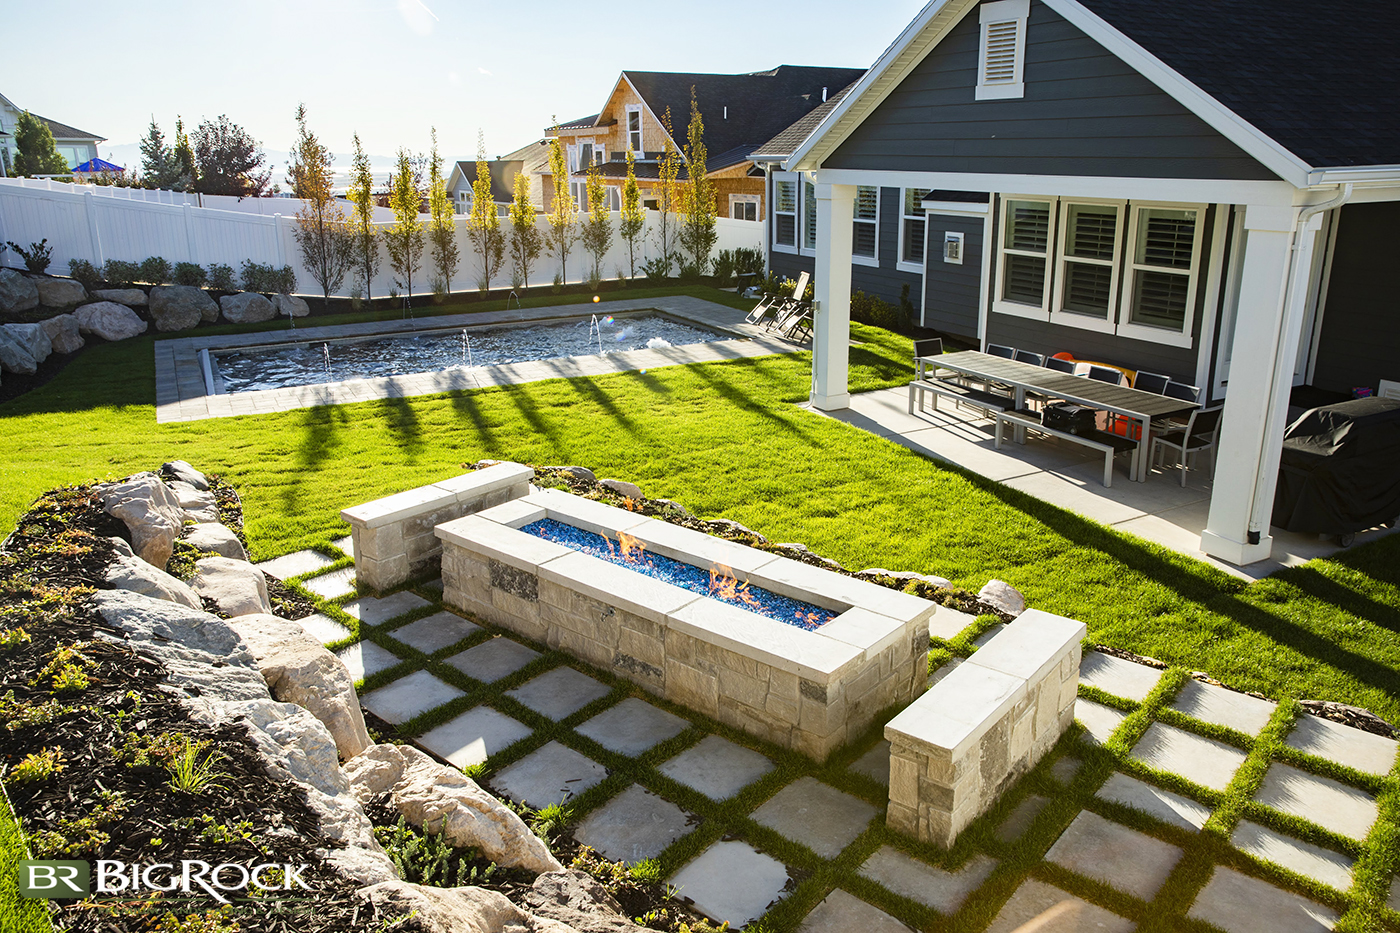 Creating your backyard takes more thought and planning than simply planting a few plants. Backyard landscape design is an important part of the landscaping process.